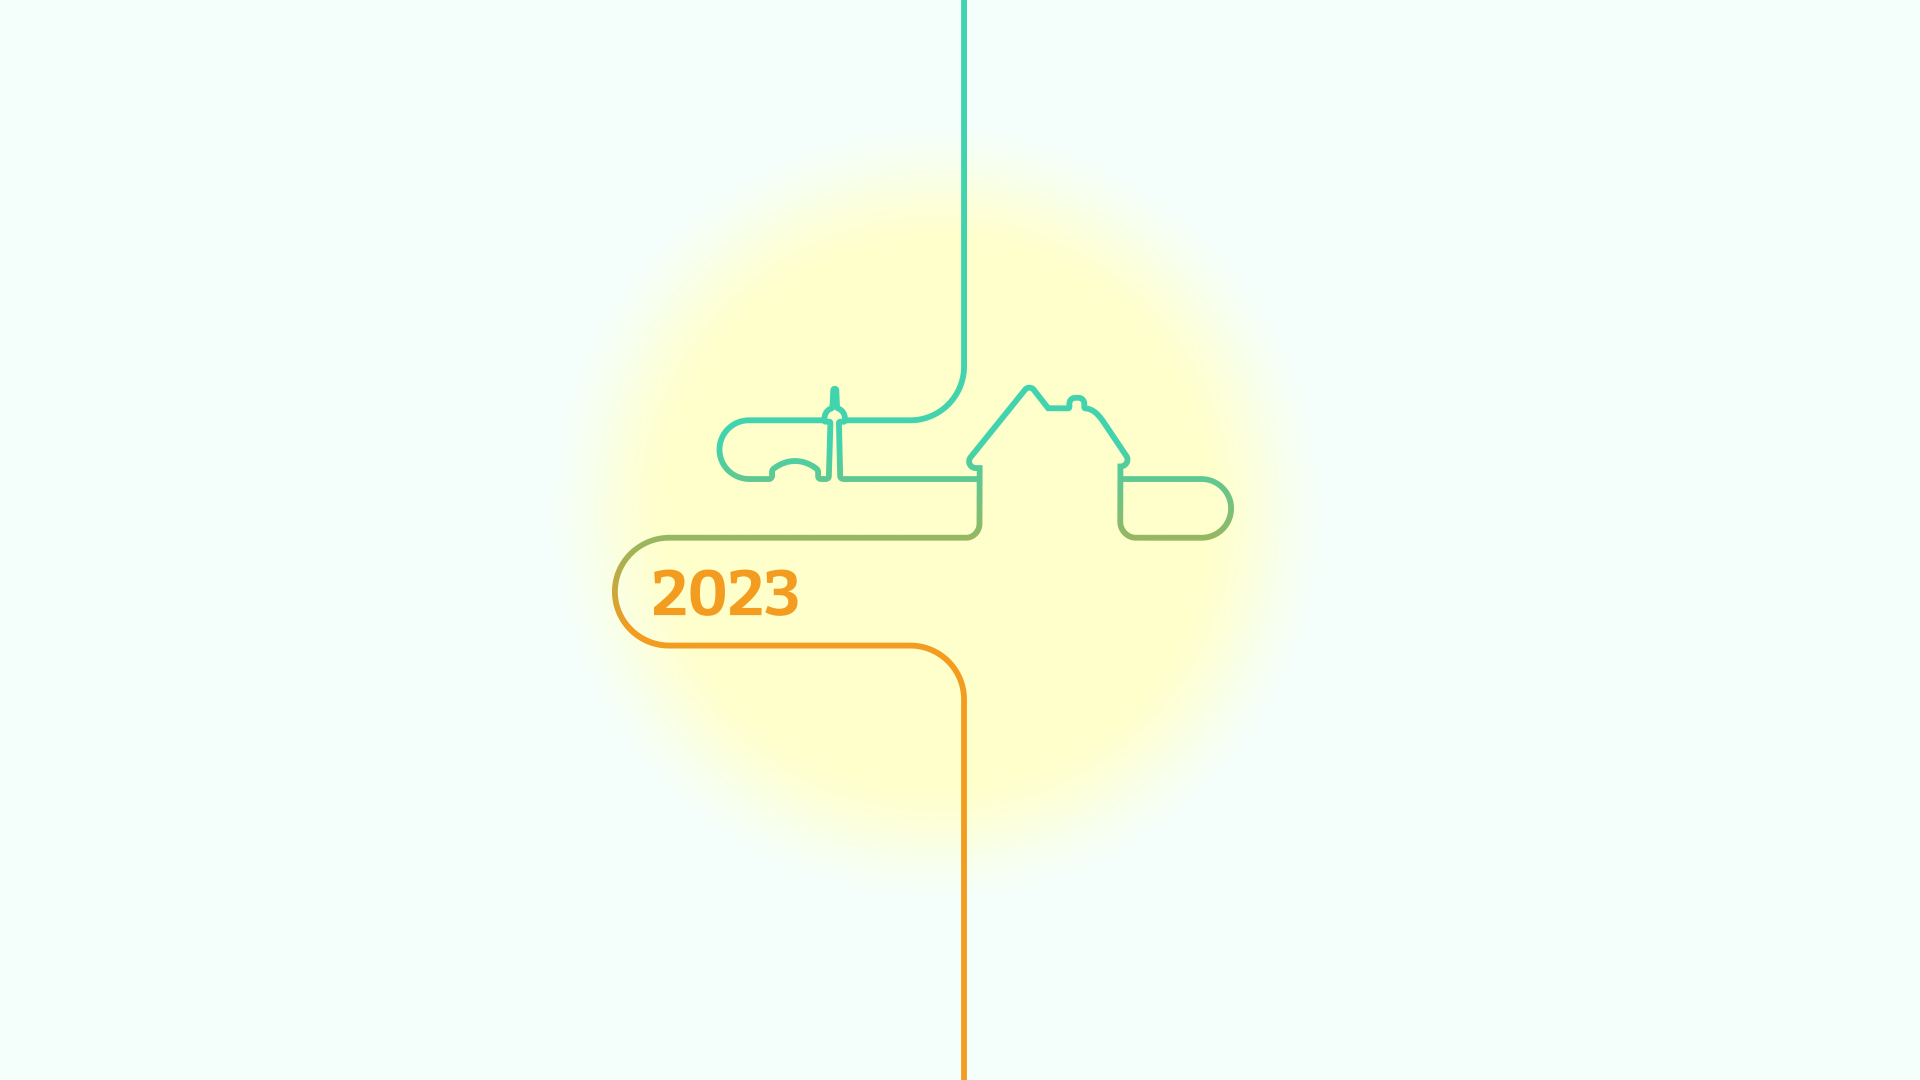 Introducing the little icon that follows the user from their first choice to the presentation of their results. This icon represents the reader's choices as drawn by the thread. Here, the illustration shows the CN Tower in the background, a detached house in the background, and the year 2023 in the foreground. The icon is set in a pale yellow circle, in which it stands out visually. The whole is presented on a pale blue background.